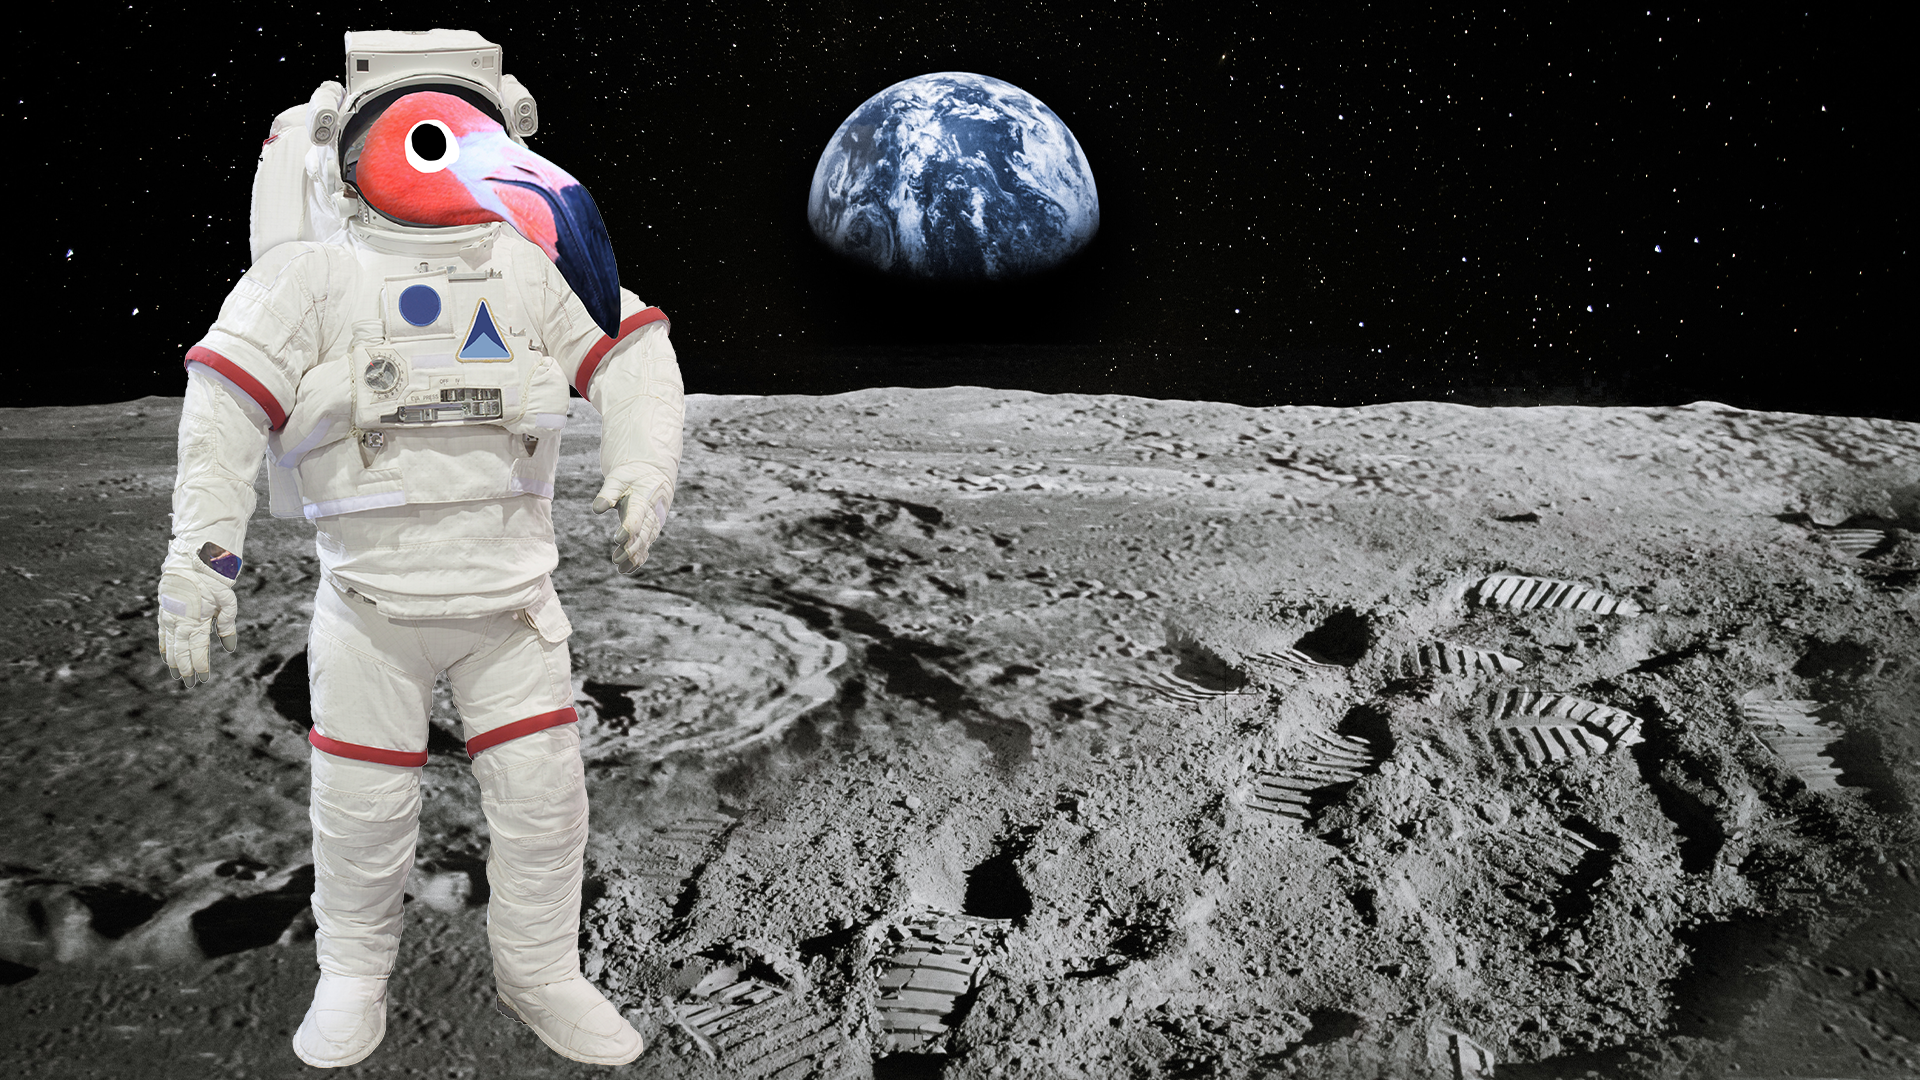 Flamingo in spacesuit on the moon